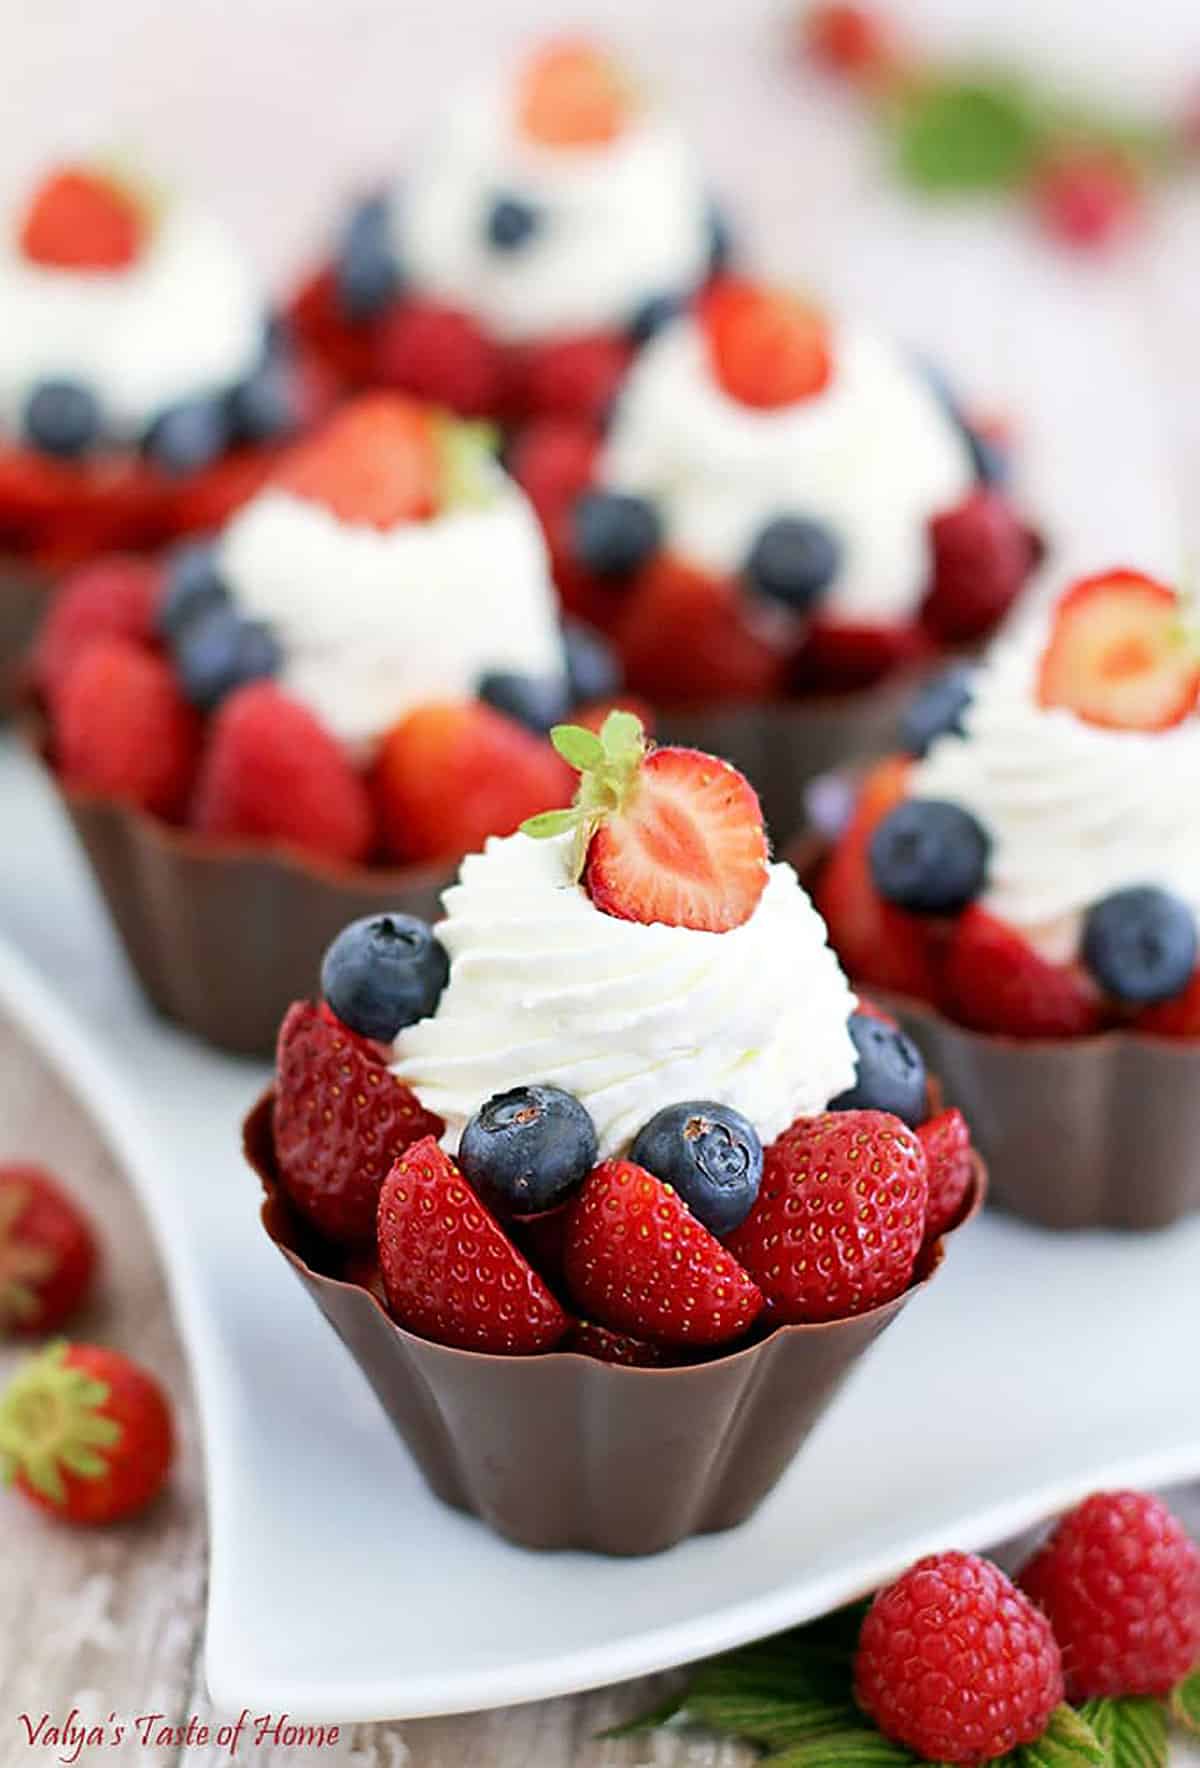 These Fruit Chocolate Cups with fresh berries, chocolate pudding, and cream are incredible little desserts that not only look elegant but taste delicious too!